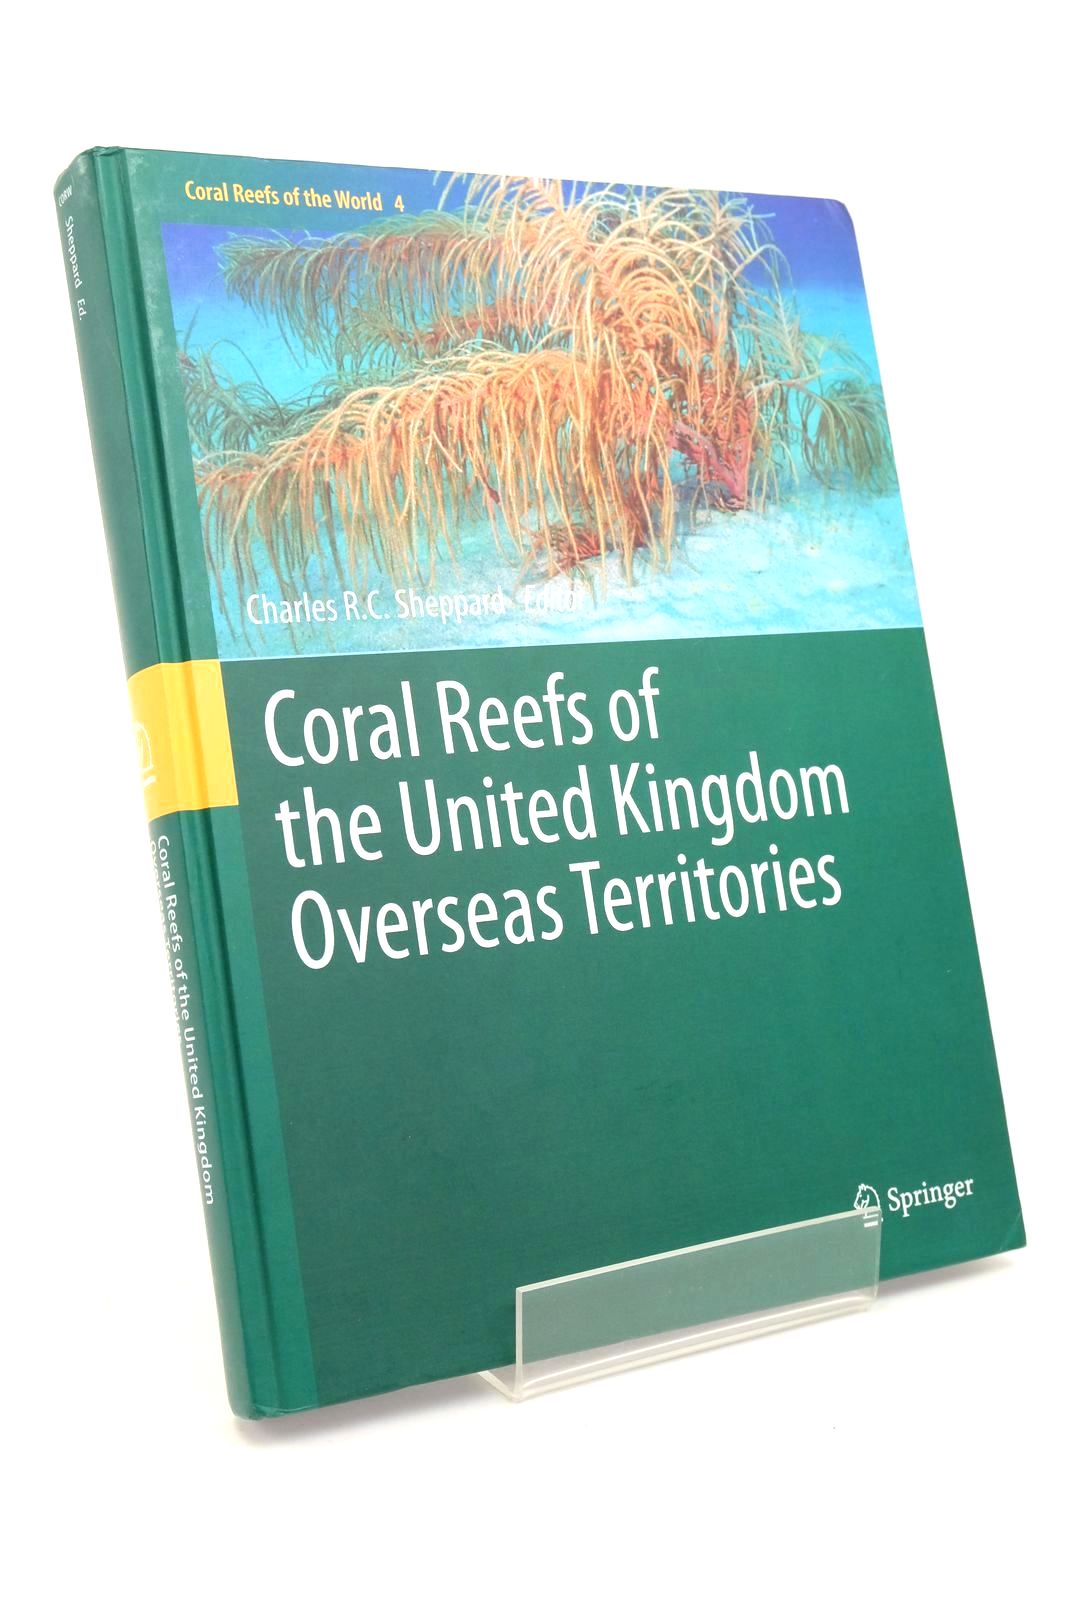 Photo of CORAL REEFS OF THE UNITED KINGDOM OVERSEAS TERRITORY- Stock Number: 1323041